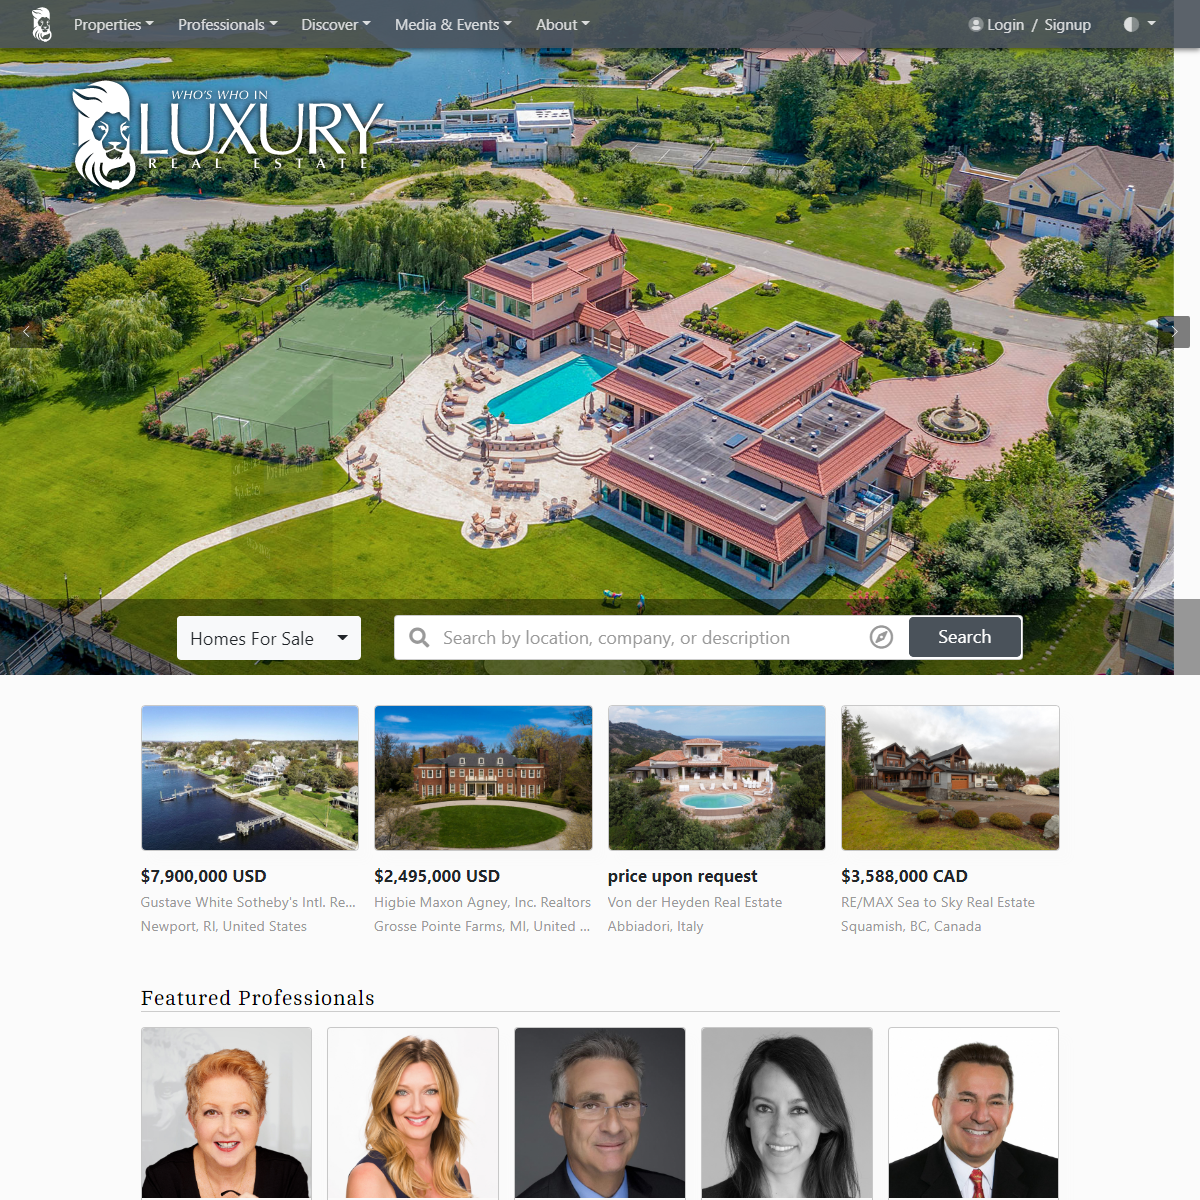 A complete backup of https://www.luxuryrealestate.com/